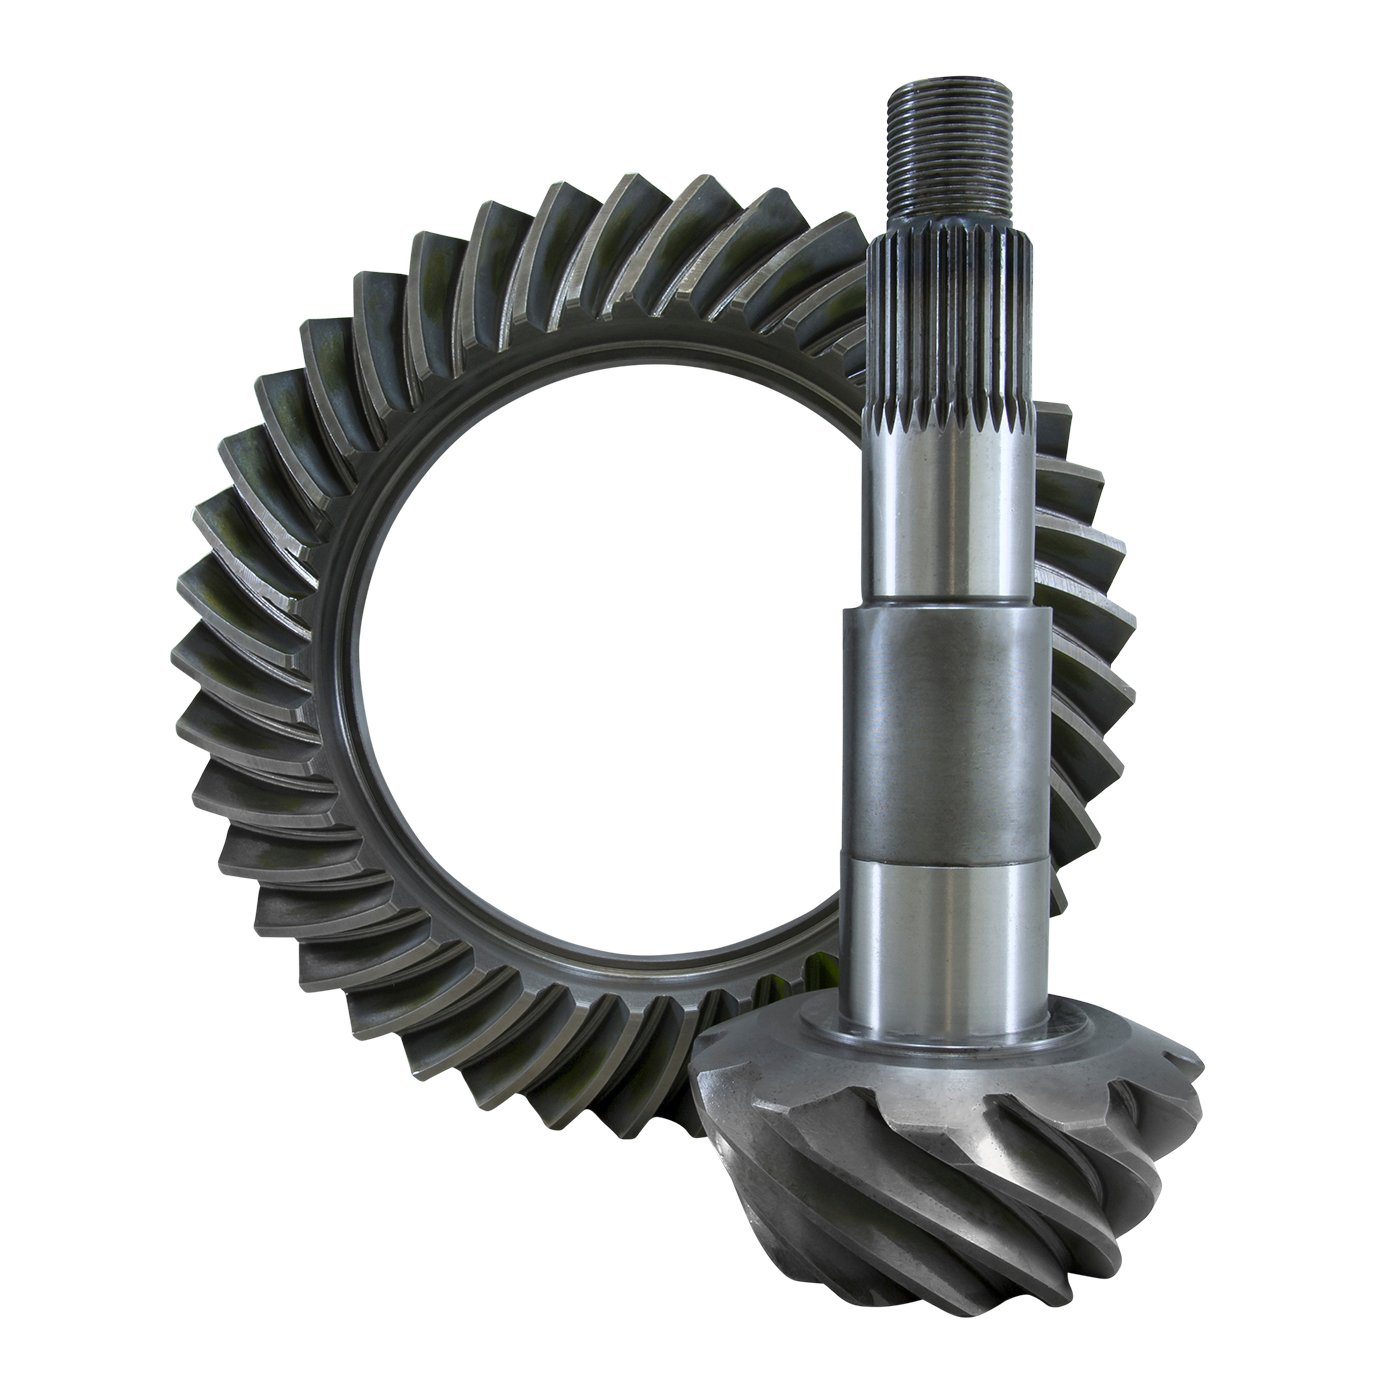 USA Standard 36163 Ring & Pinion Gear Set, For GM & Chrysler 11.5 in. Rear, 4.88 Ratio